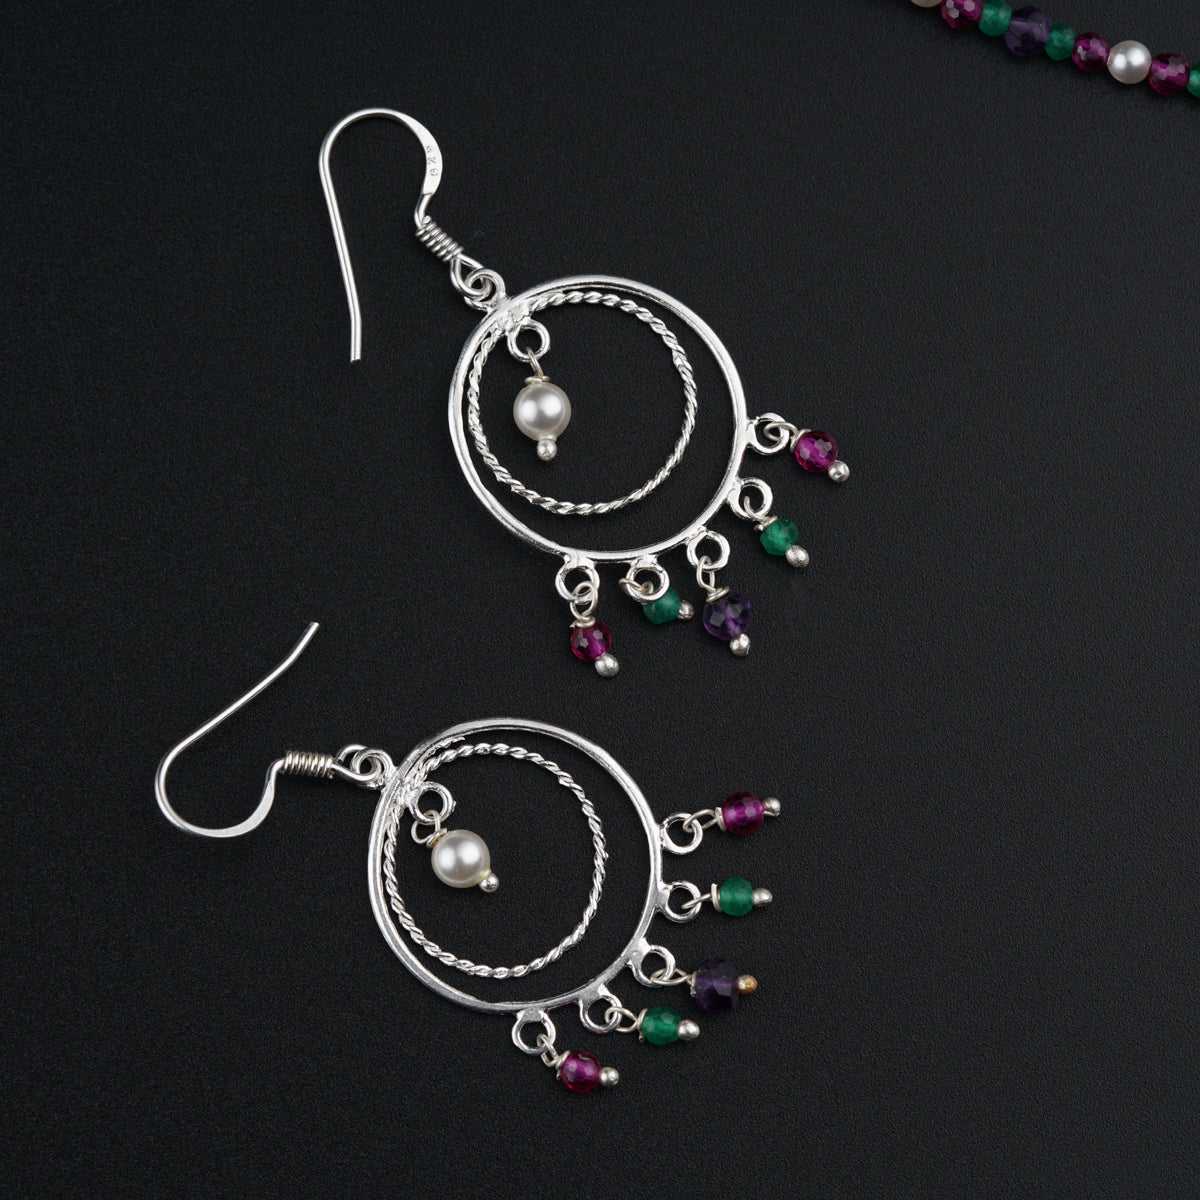 a pair of earrings with beads on a black surface